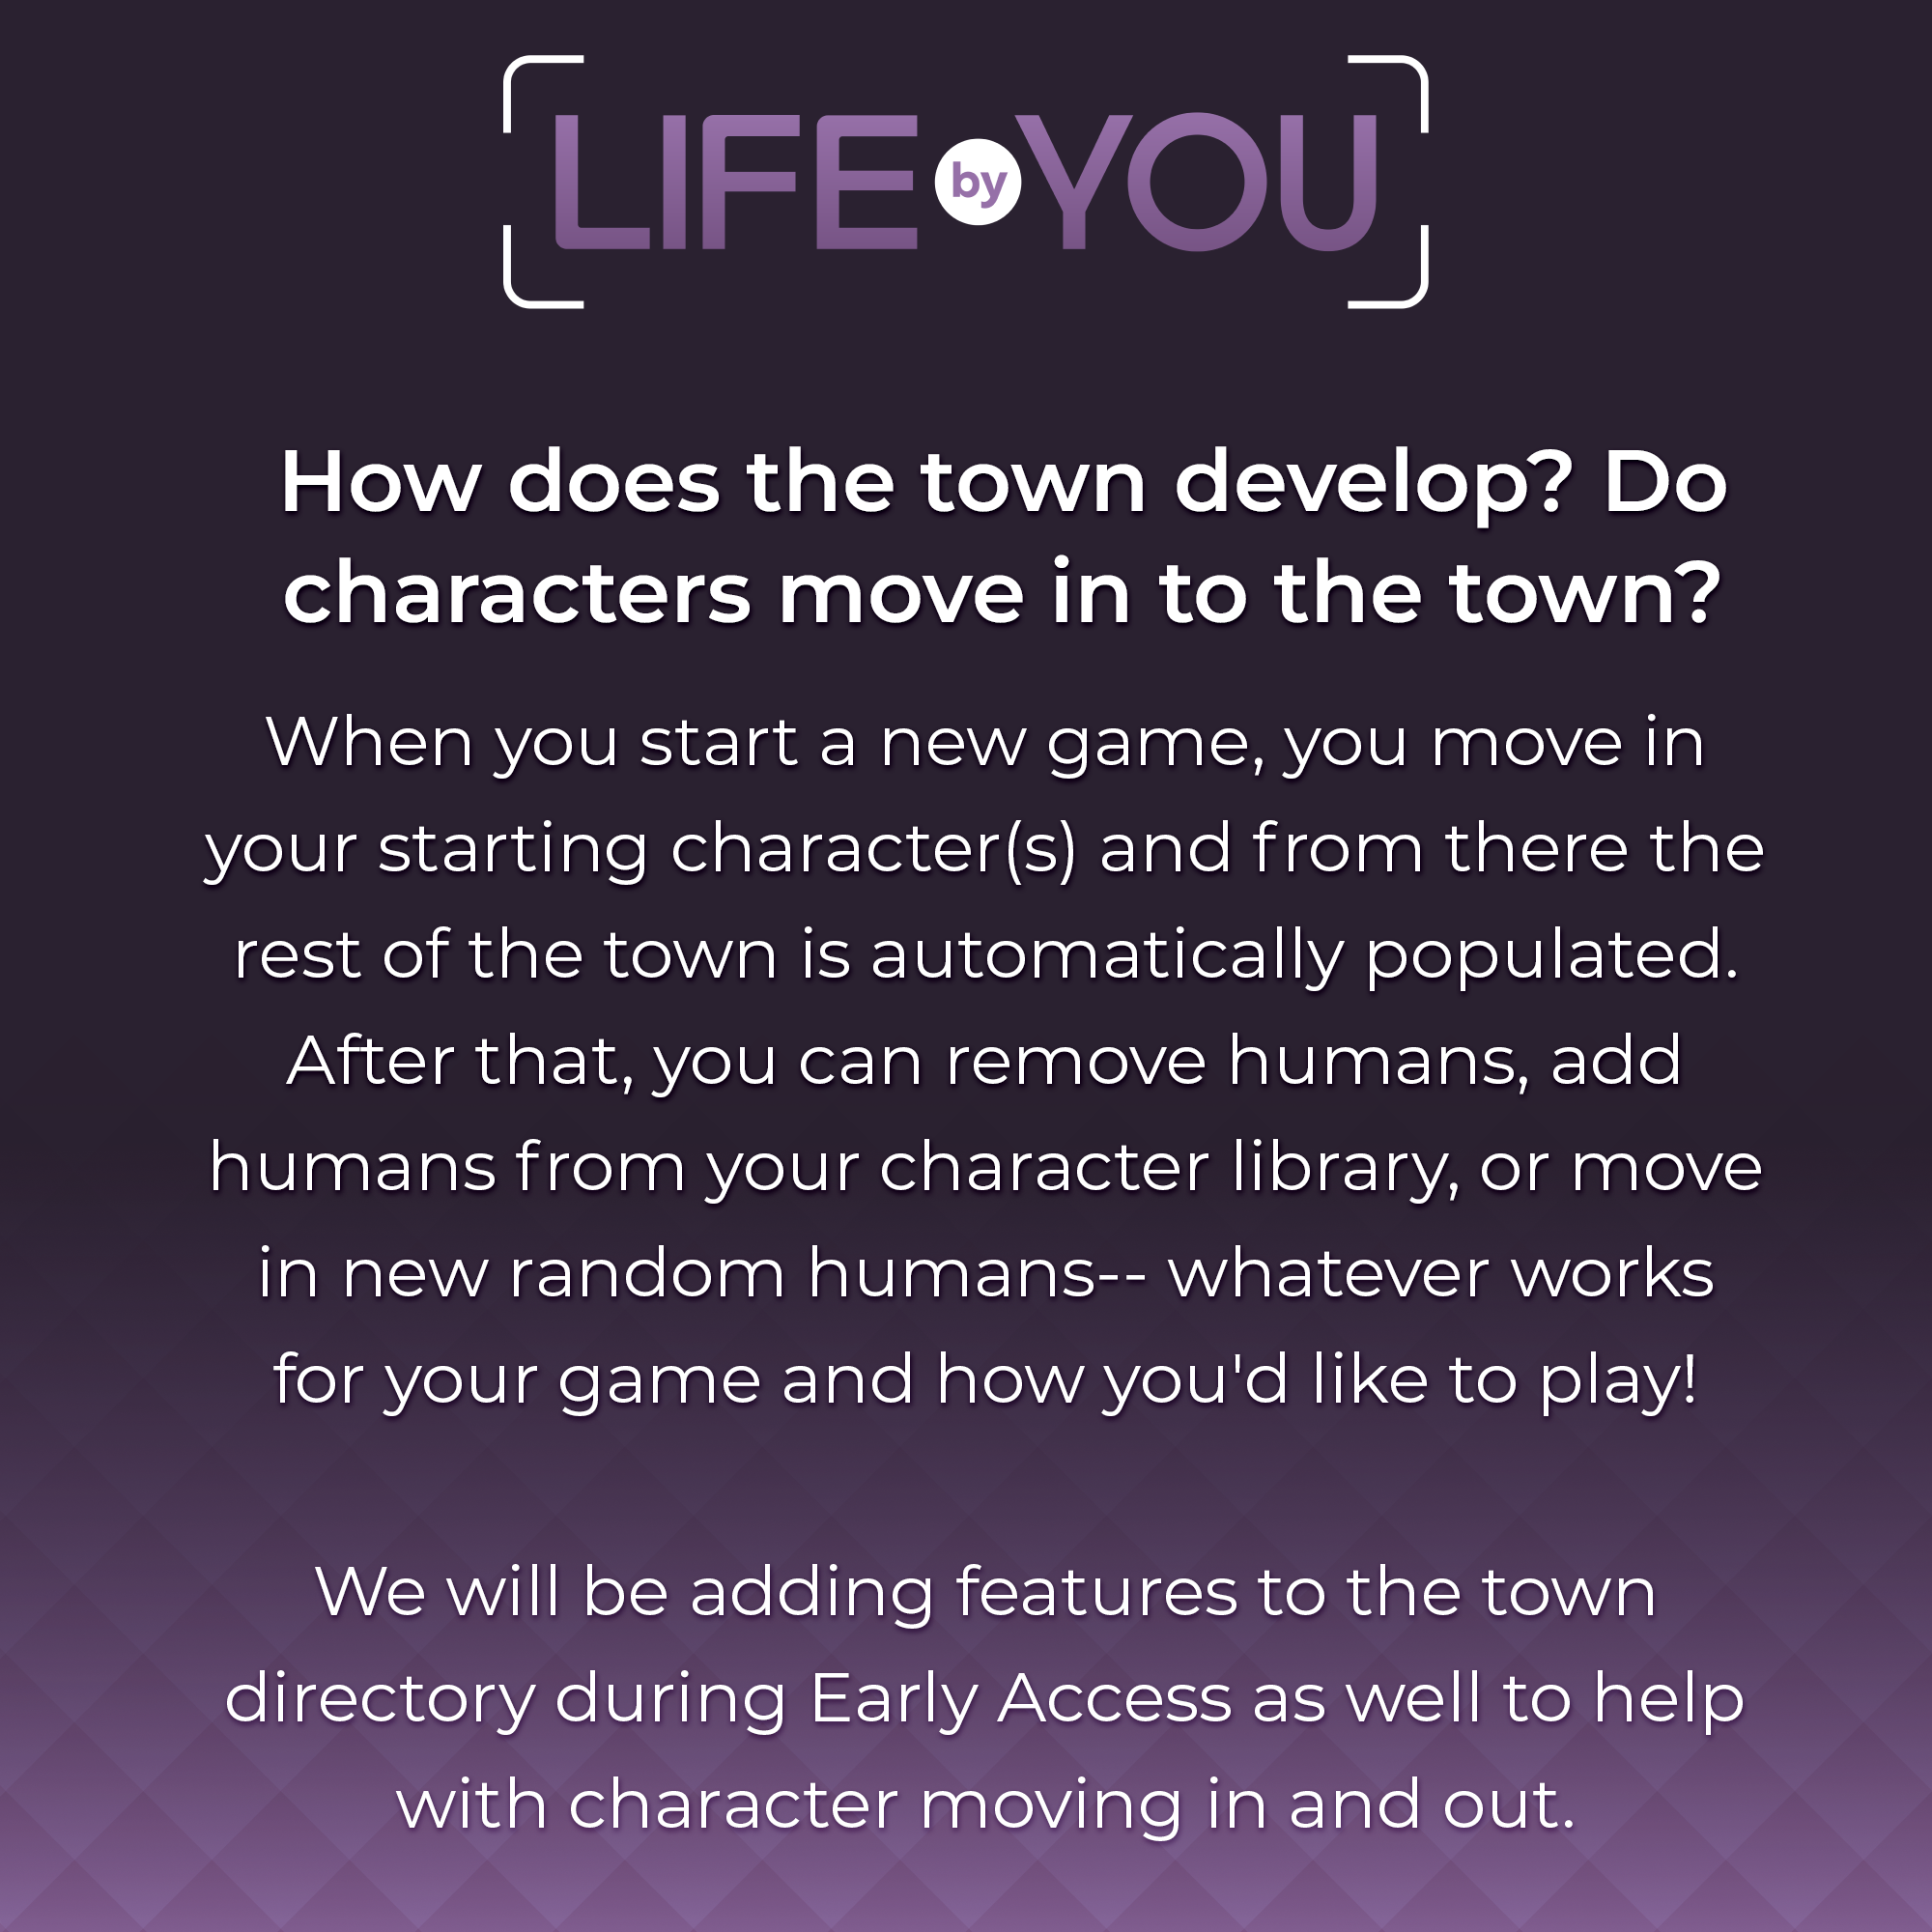 QnA How does the town develop?